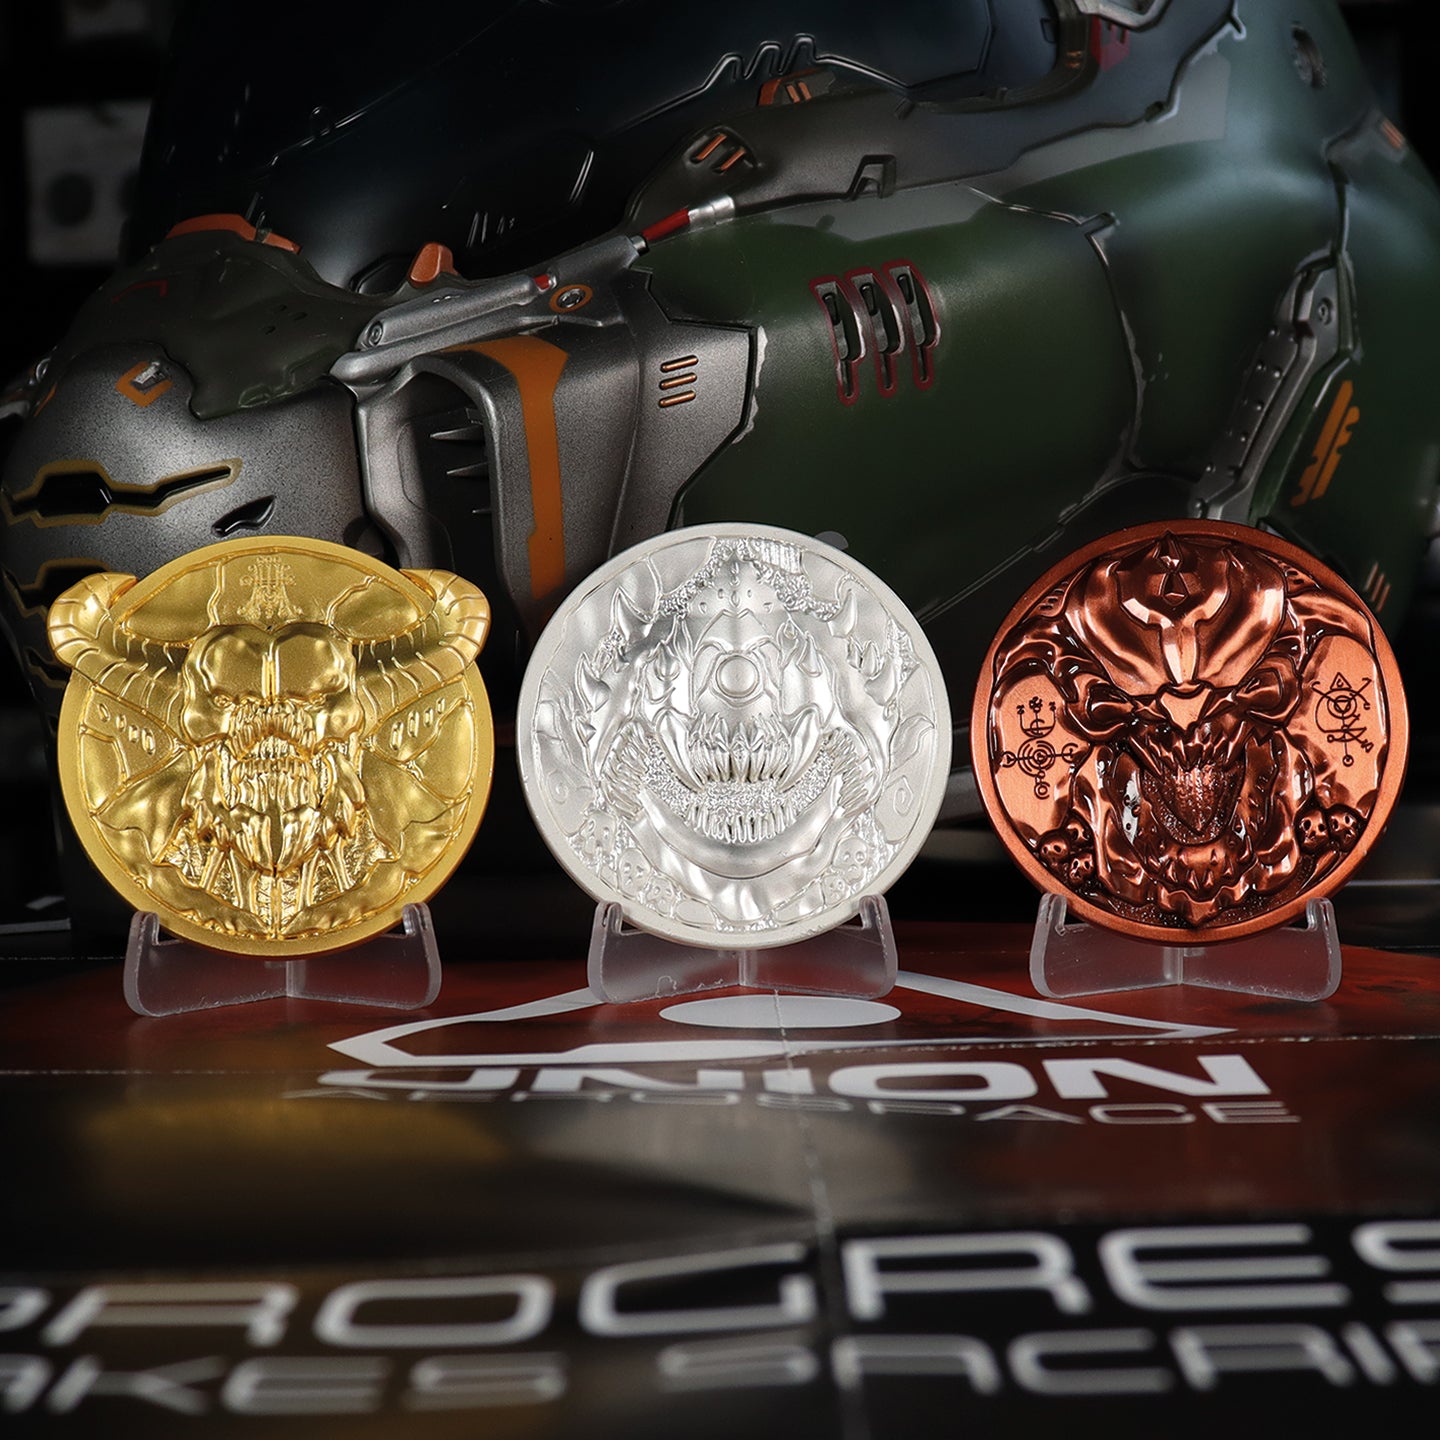 DOOM Limited Edition Set of 3 Arcade Mode Medallion Collection